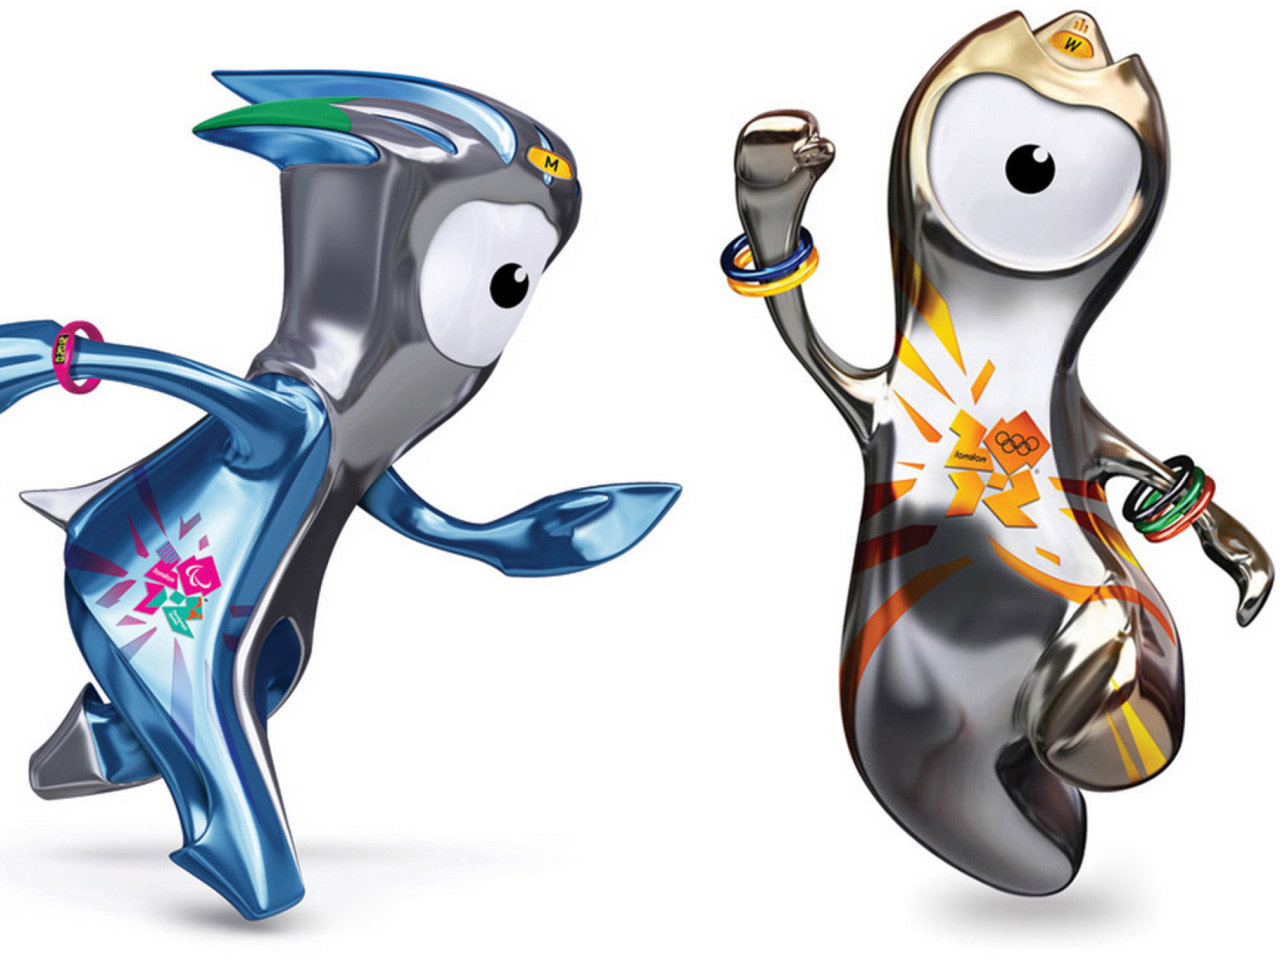 Wenlock and Mandevillelond 2012 Olympic Games wallpaper 1280x960